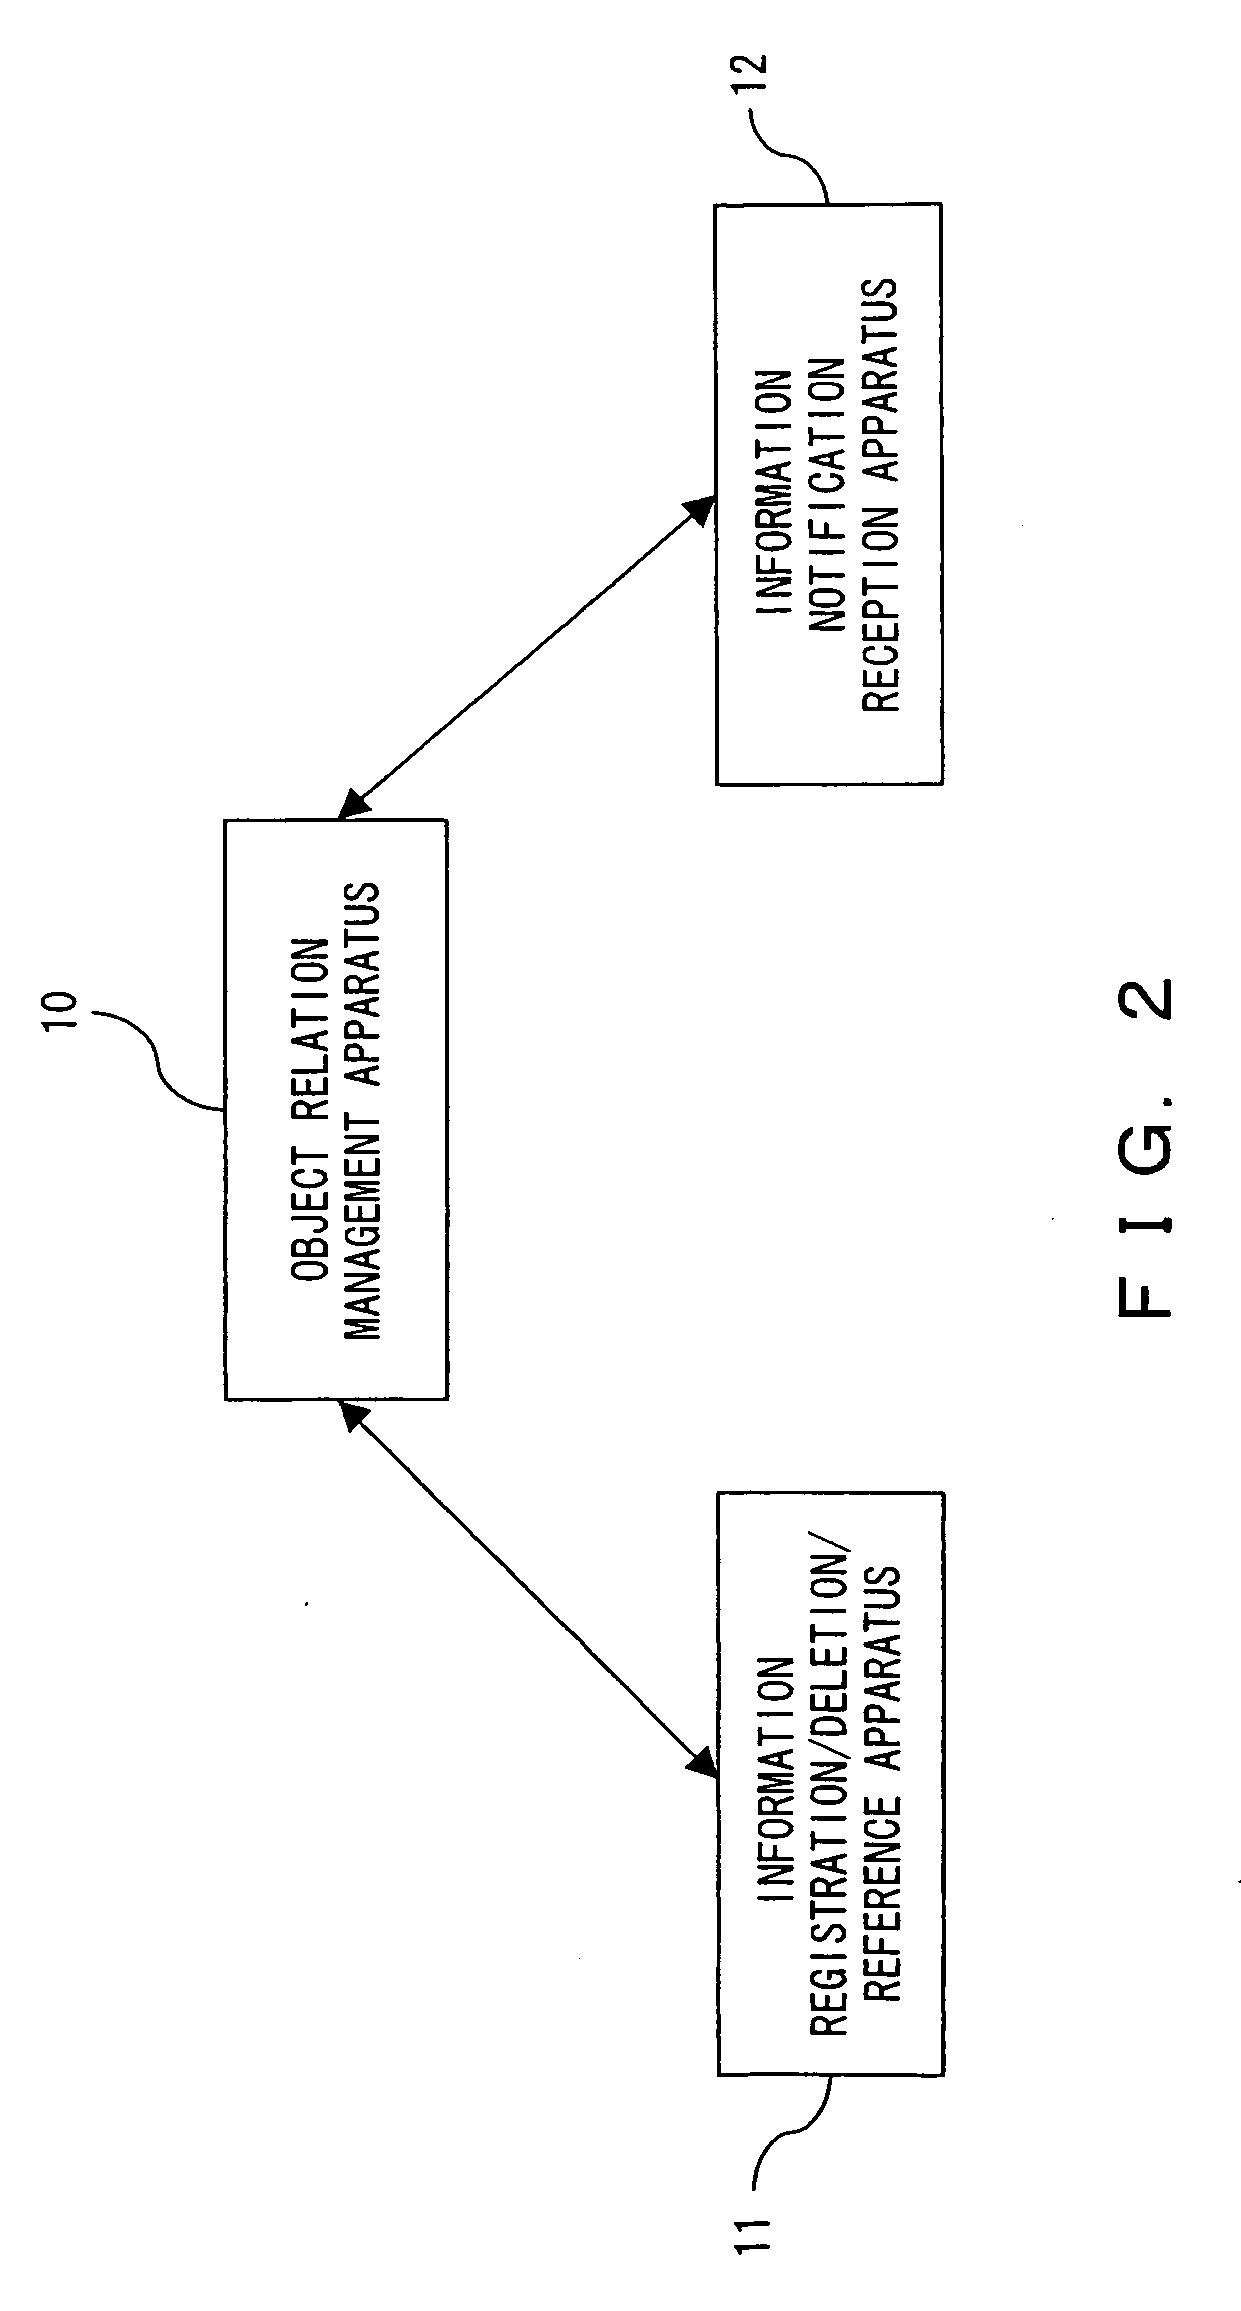 Object relation information management program, method, and apparatus